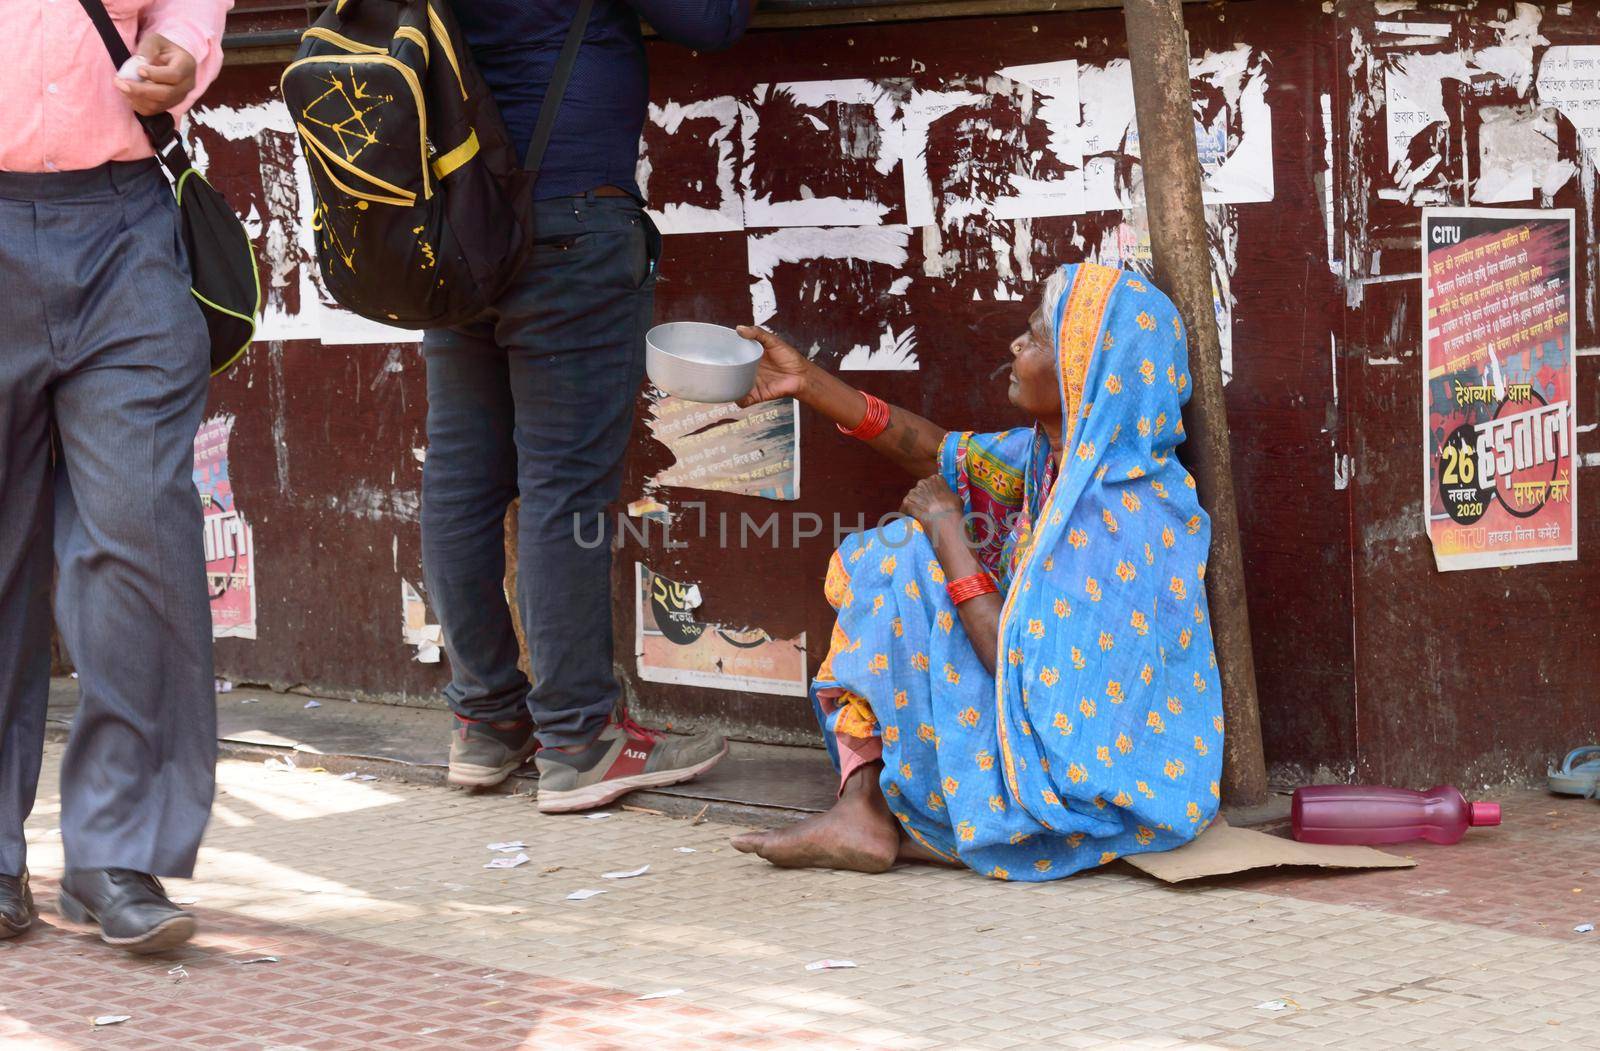 Old elderly Homeless woman begging in the city street corner of Kolkata, West Bengal, India South Asia Pacific March 15, 2021